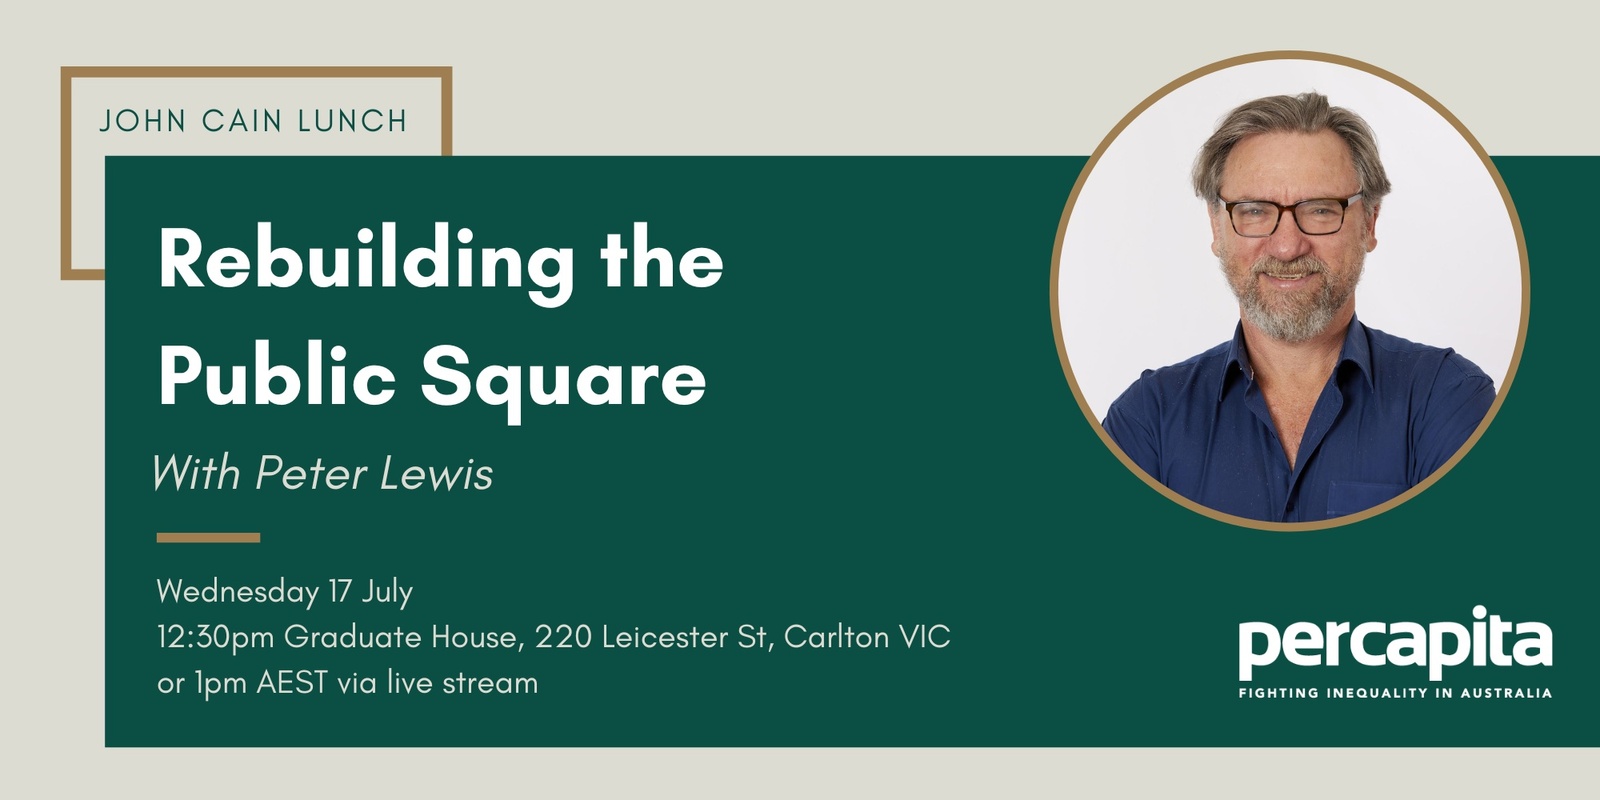 Banner image for July John Cain Lunch: Rebuilding the Public Square, with Peter Lewis